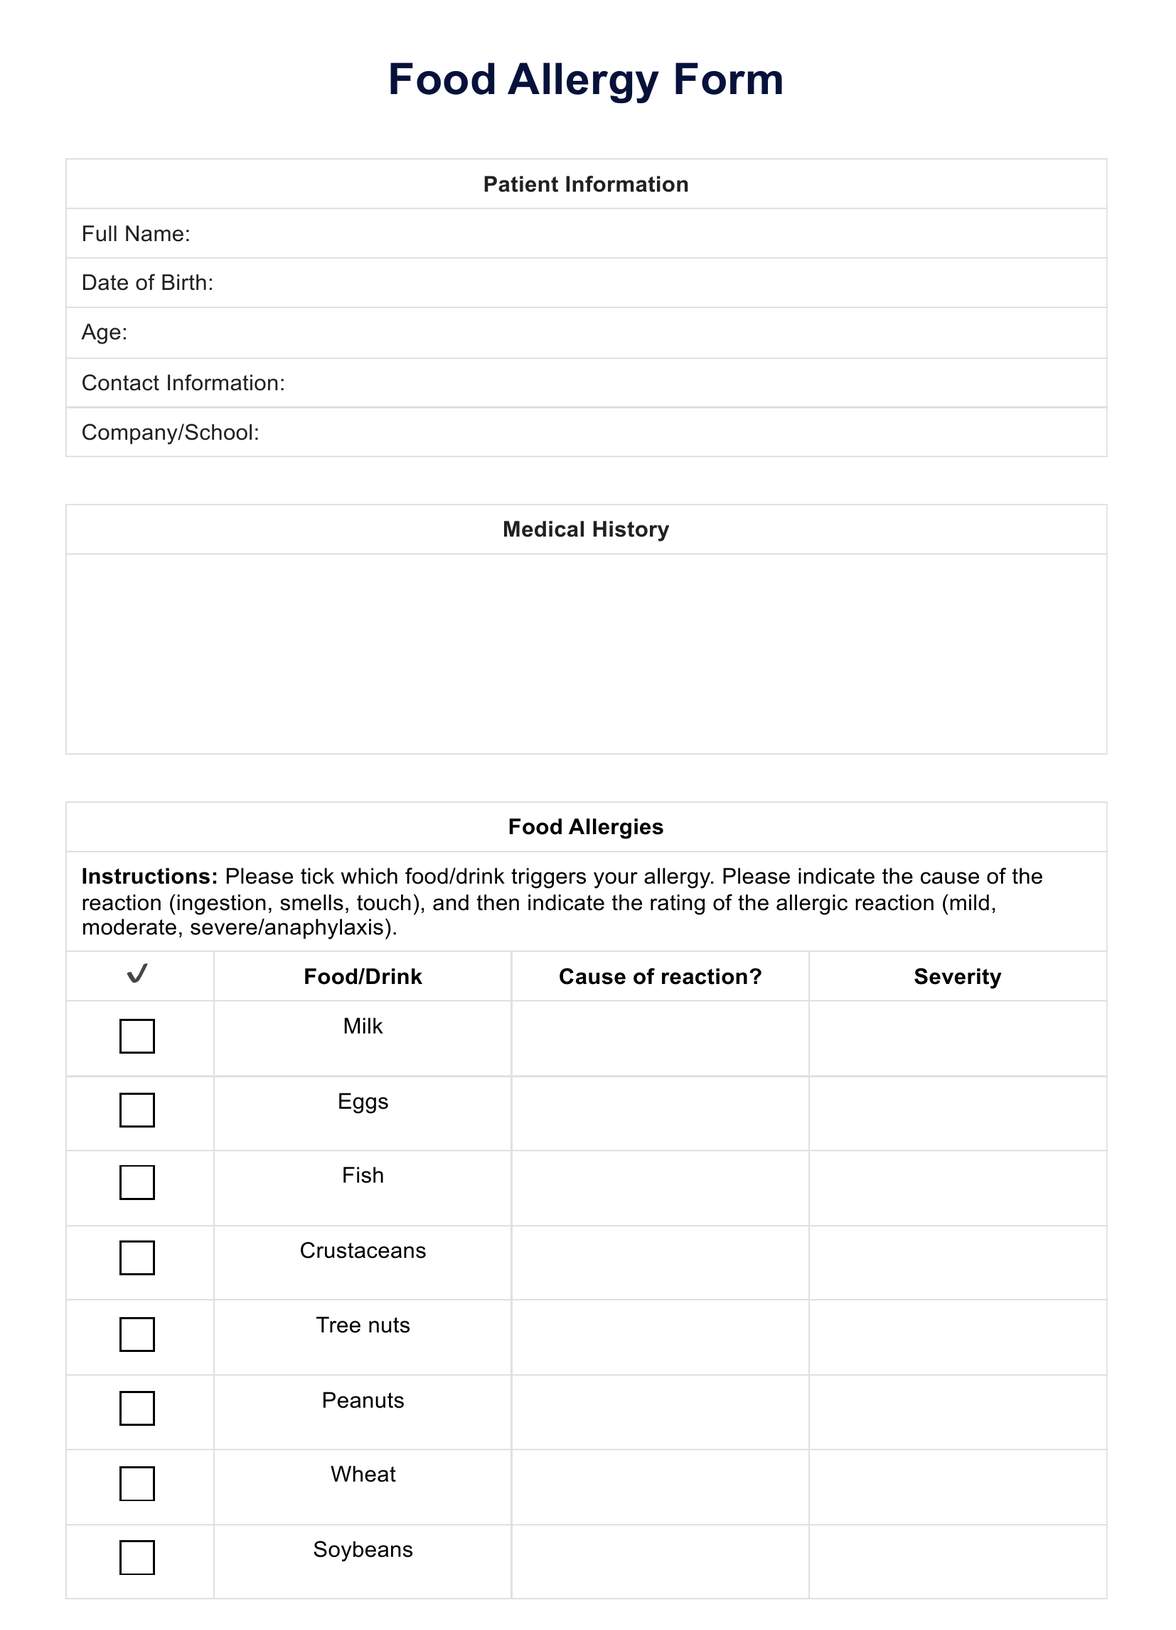 Food Allergy Form PDF Example